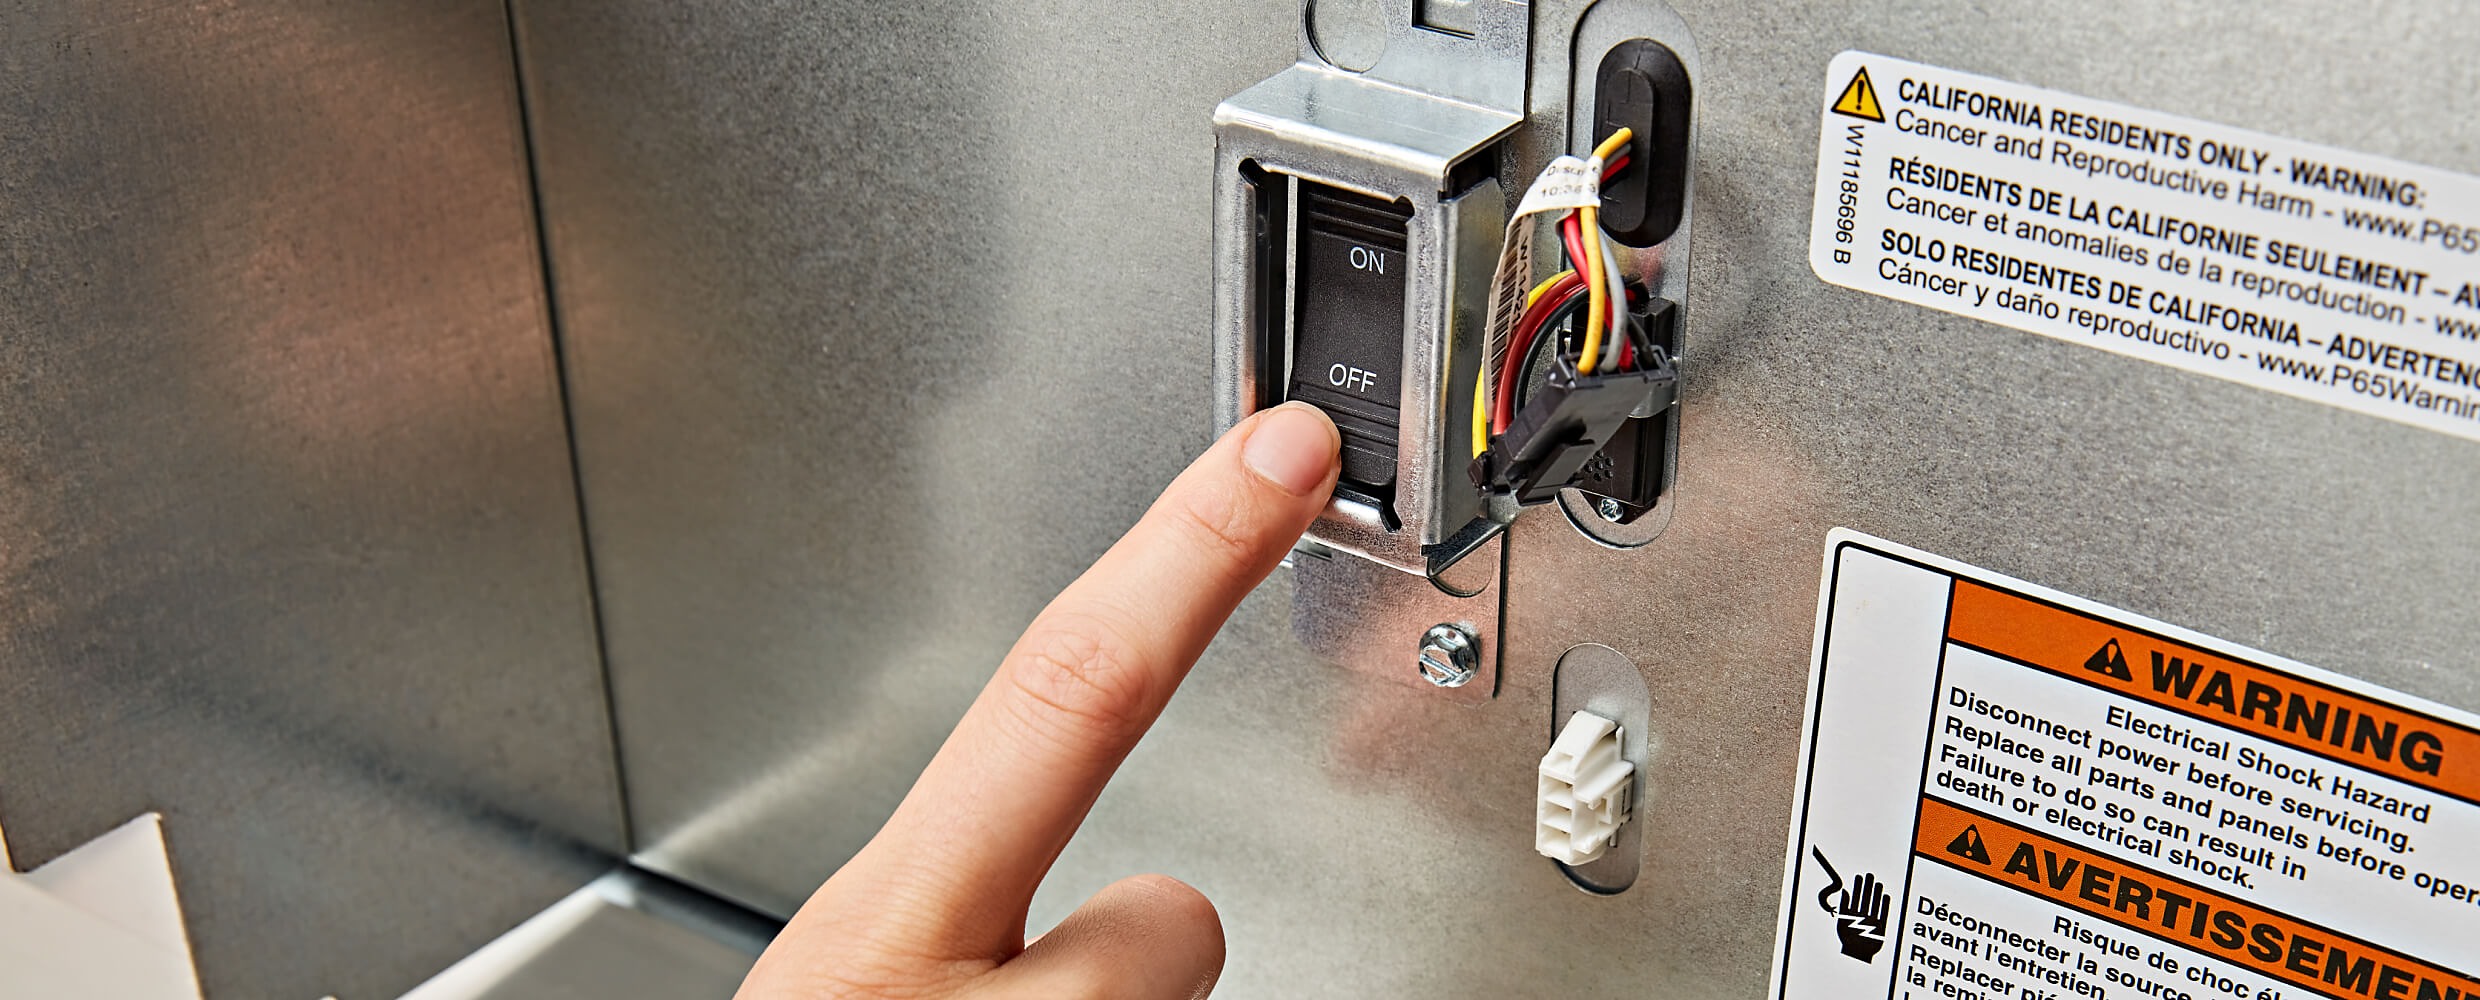 ON/OFF Power Switch of the 36" KitchenAid® Built-In Side-by-Side Refrigerator